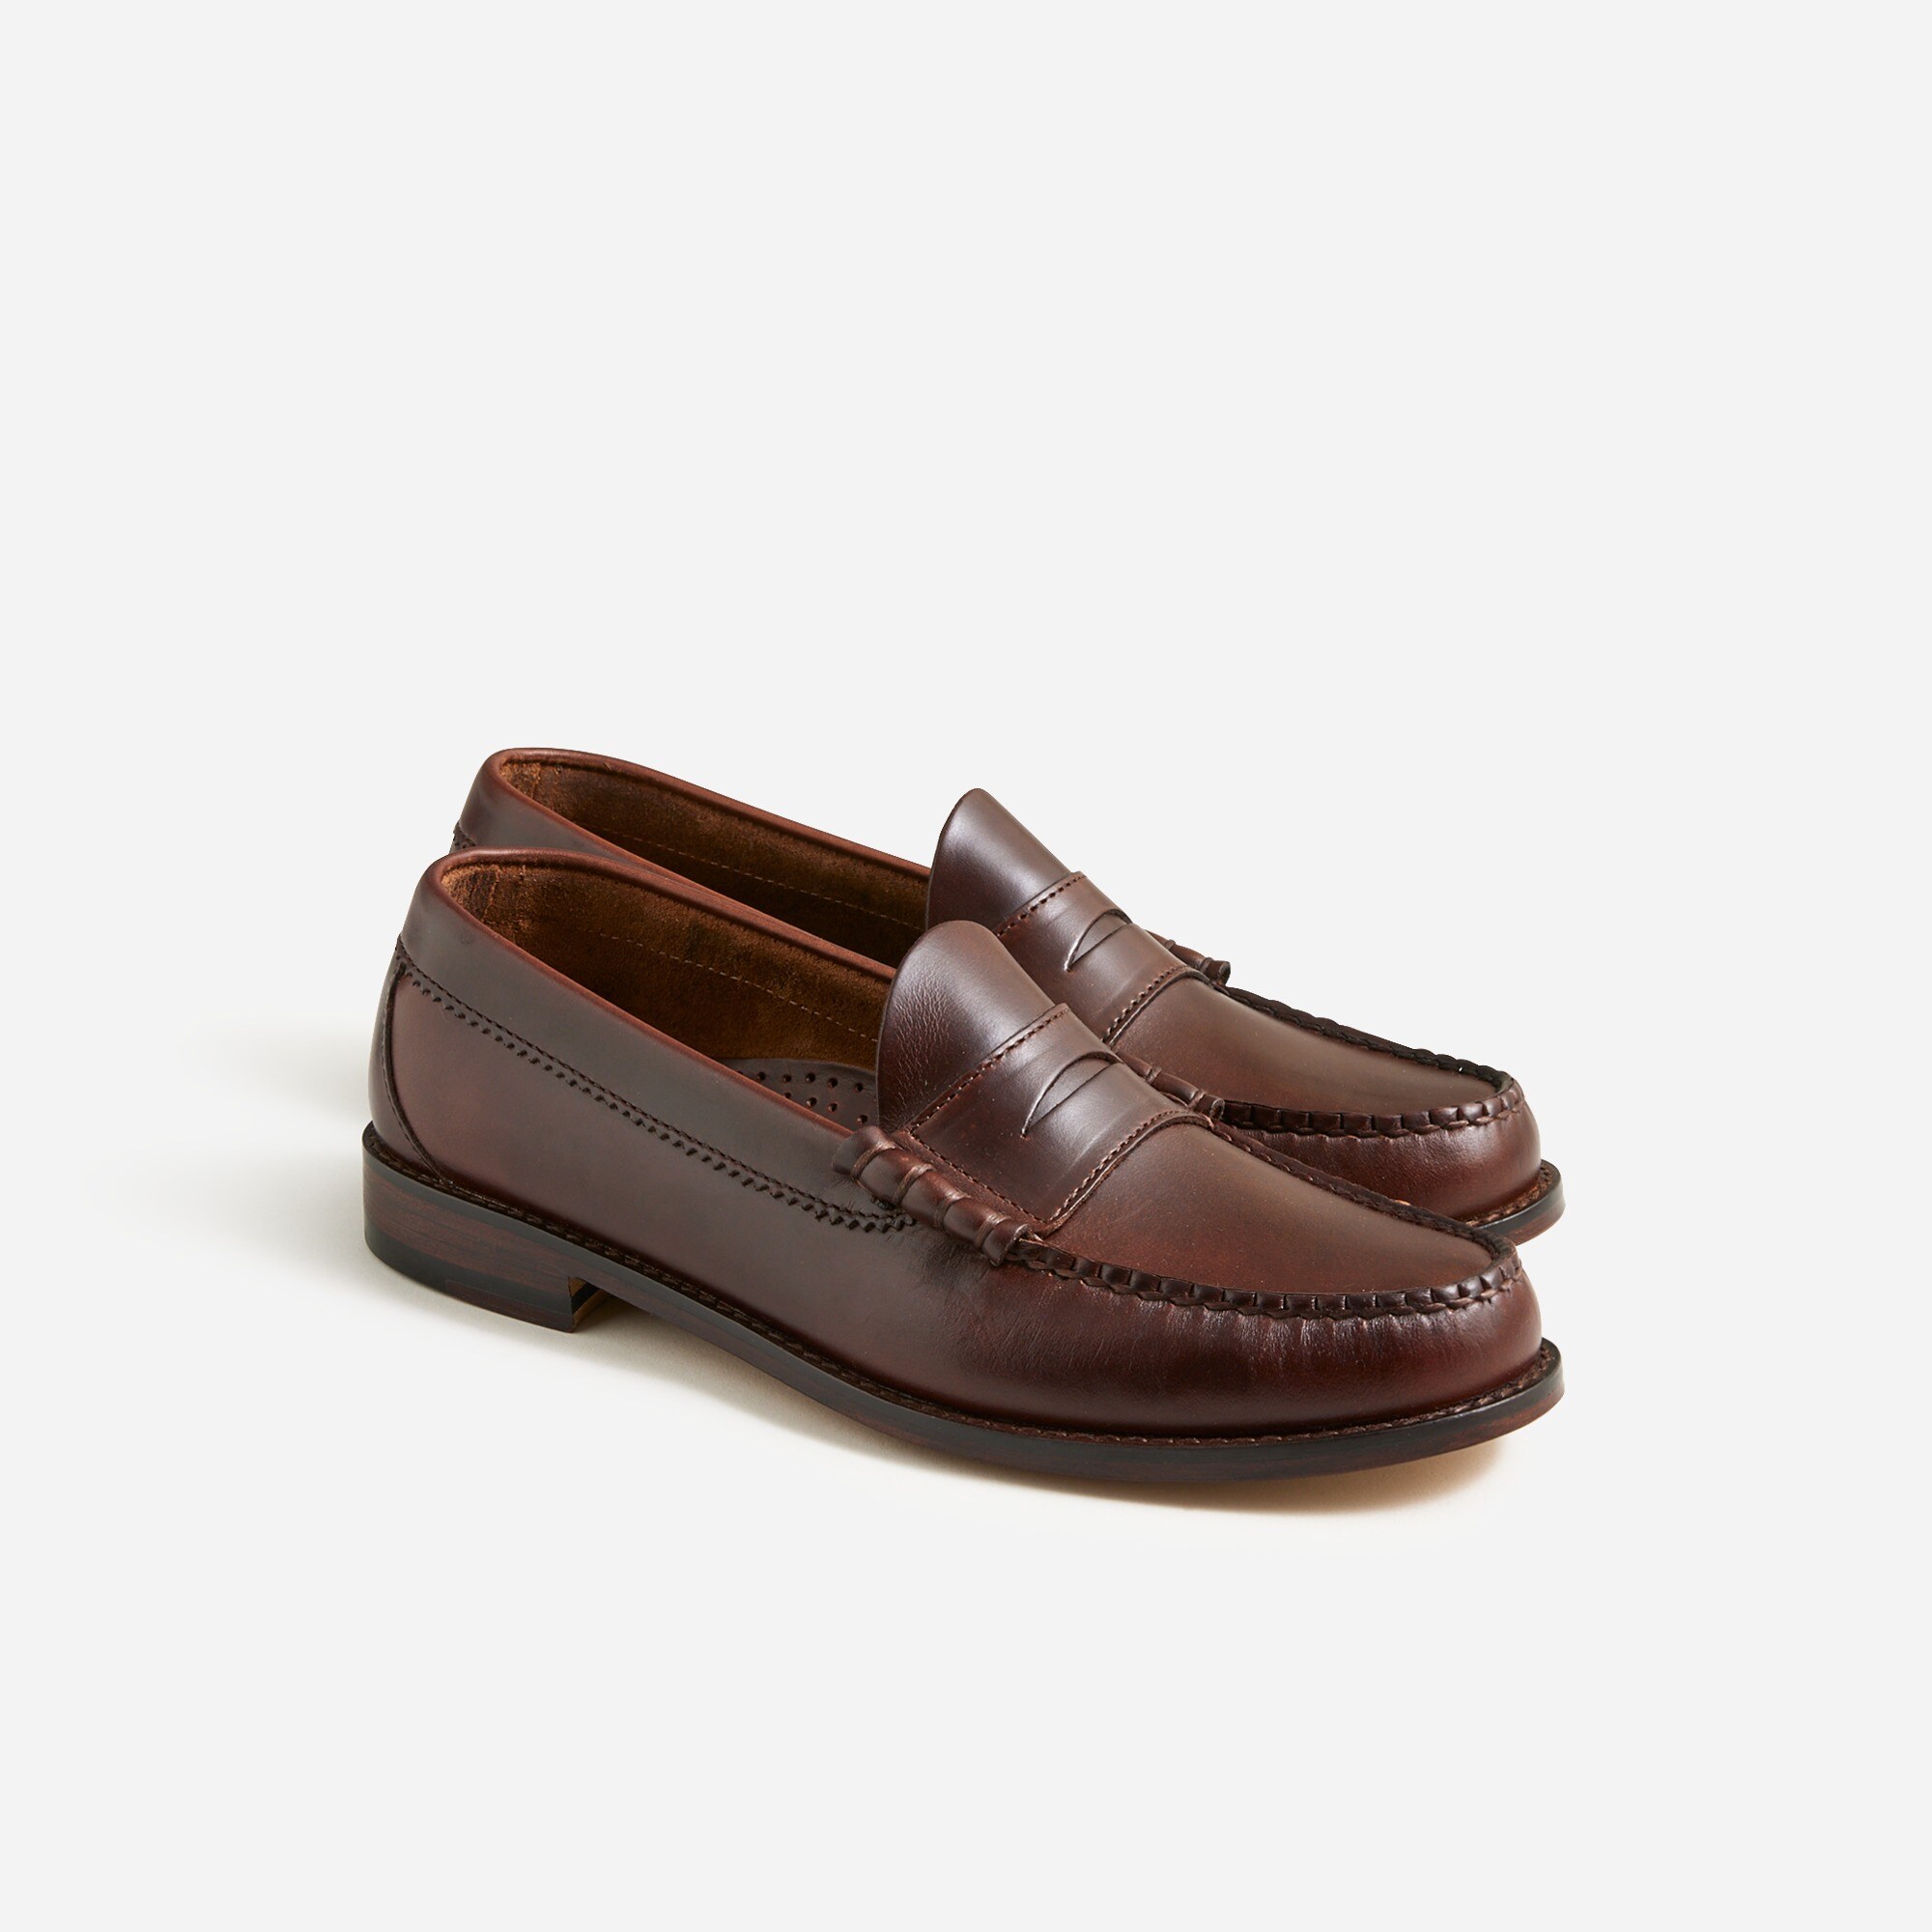  Camden loafers with leather soles